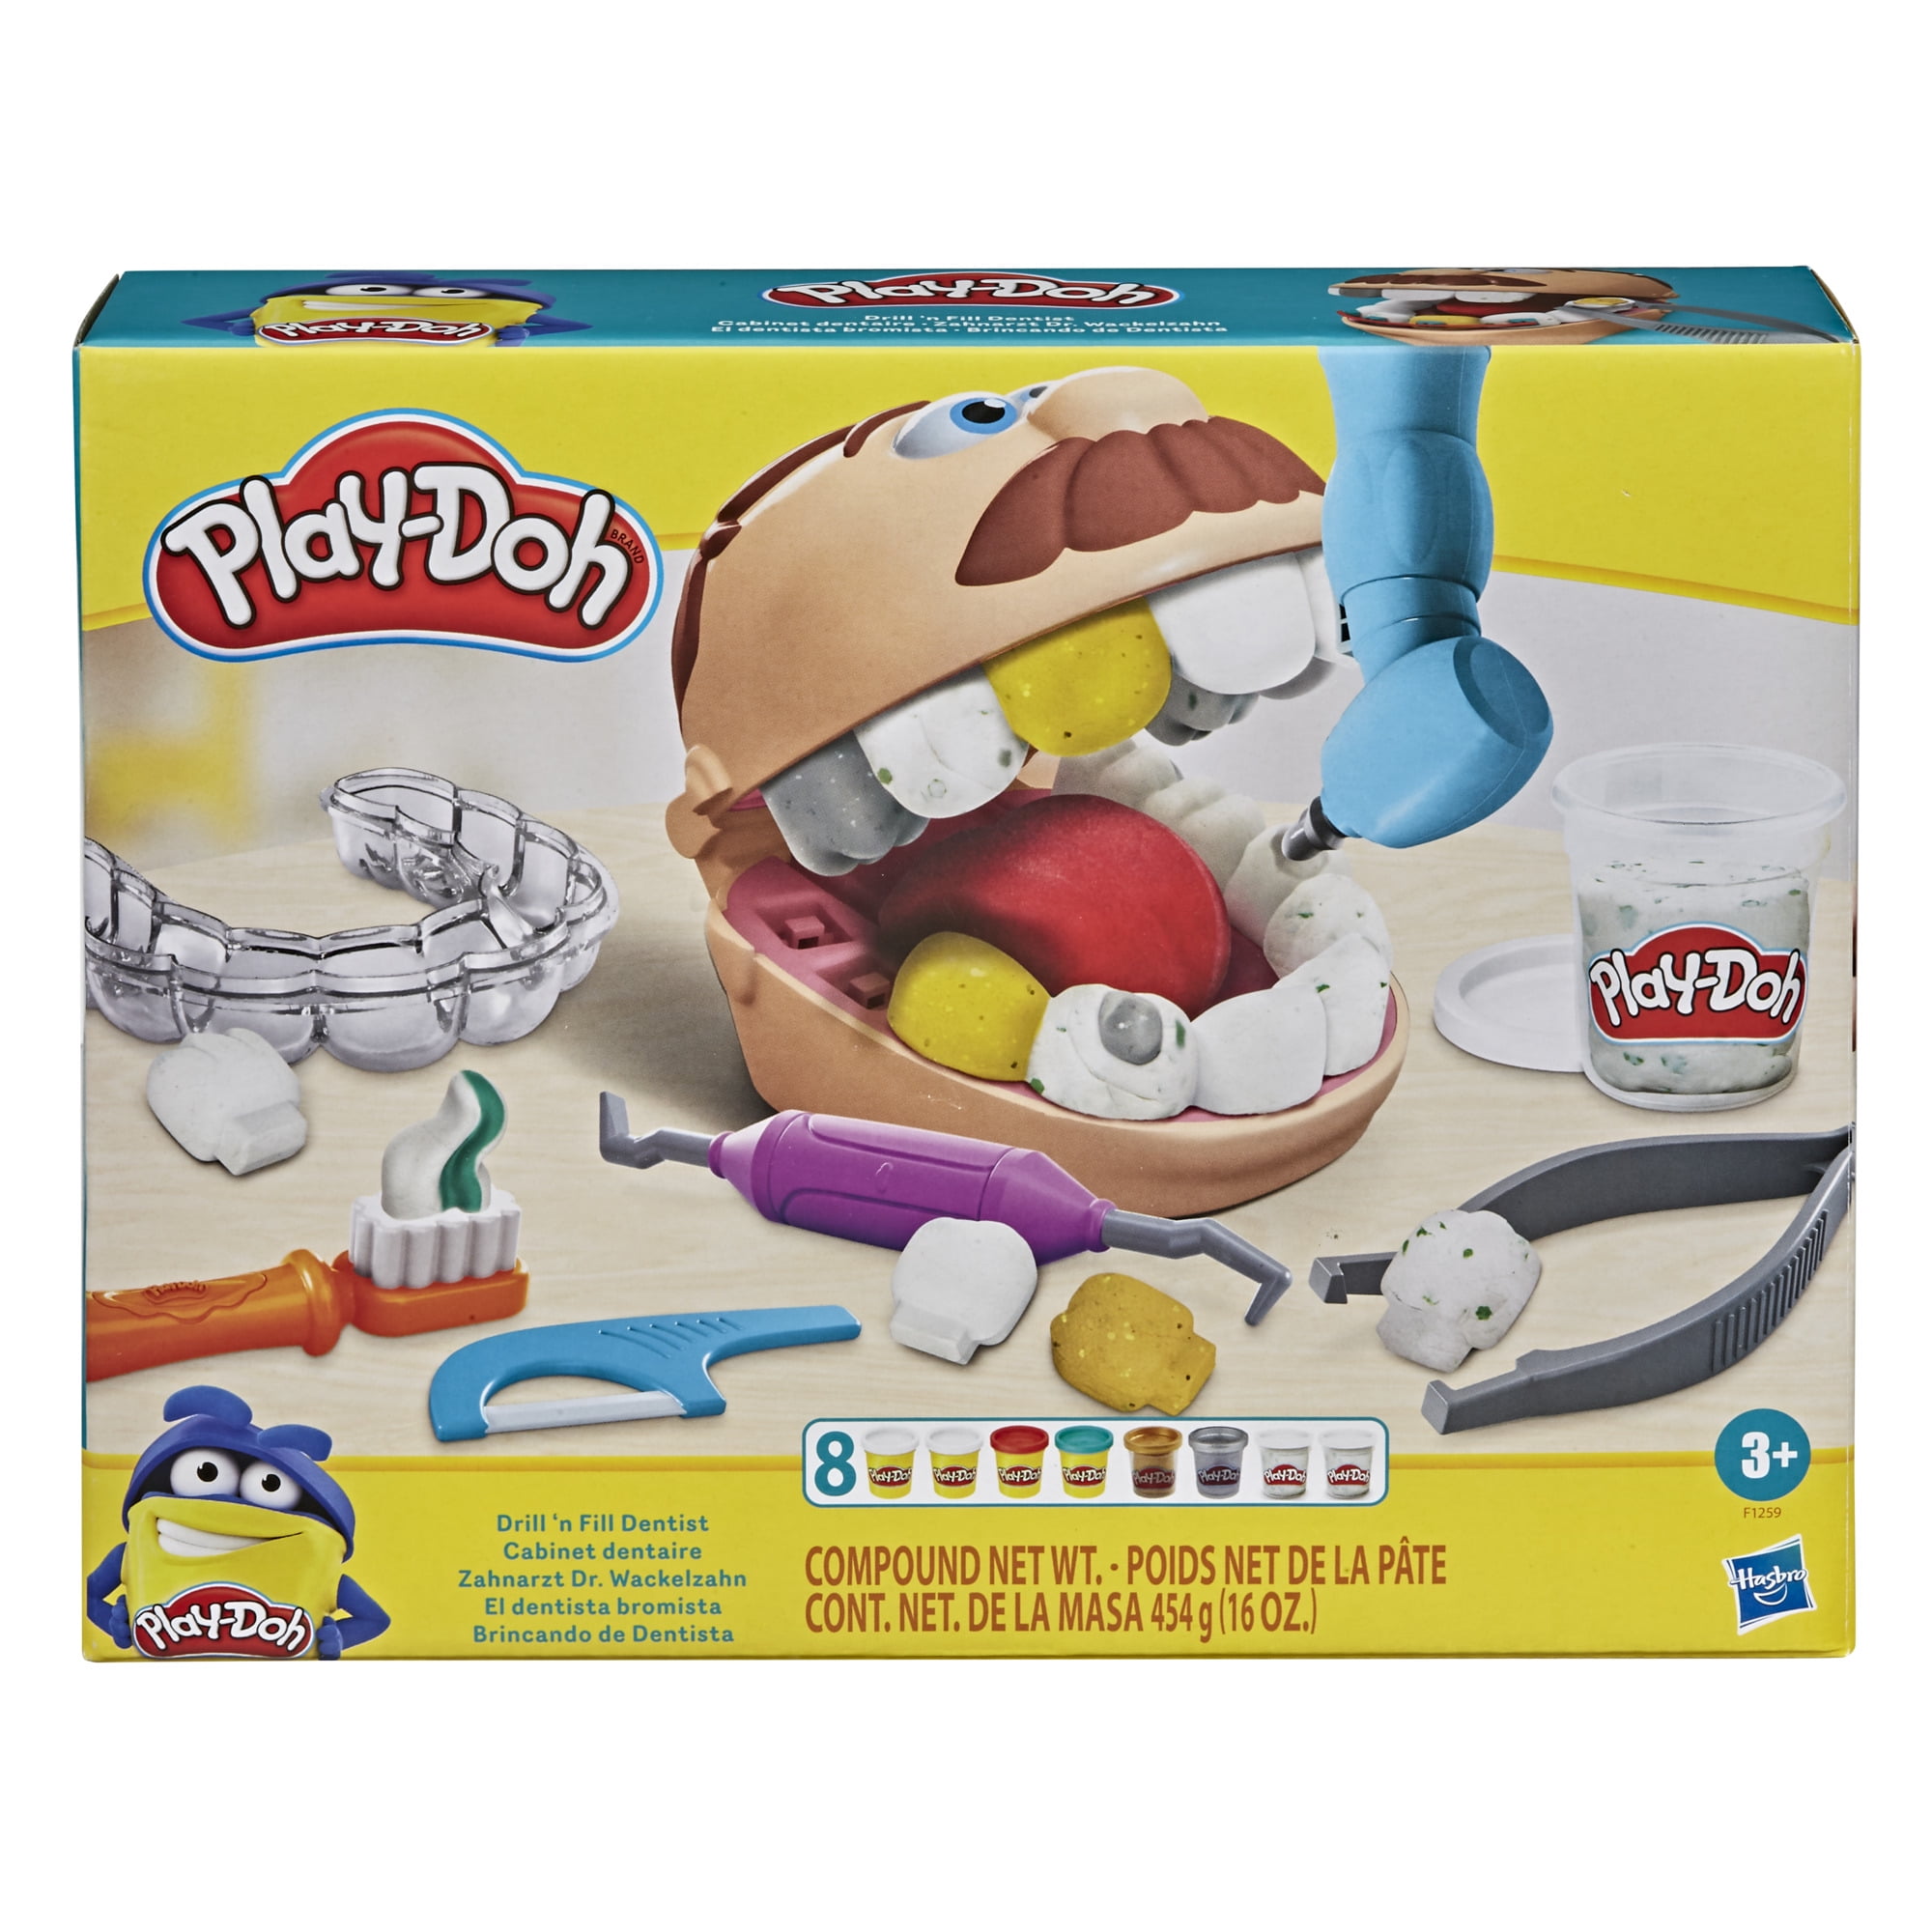 Play-Doh Drill 'n Fill Dentist, Includes 8 Cans of Compound, 16 Ounces